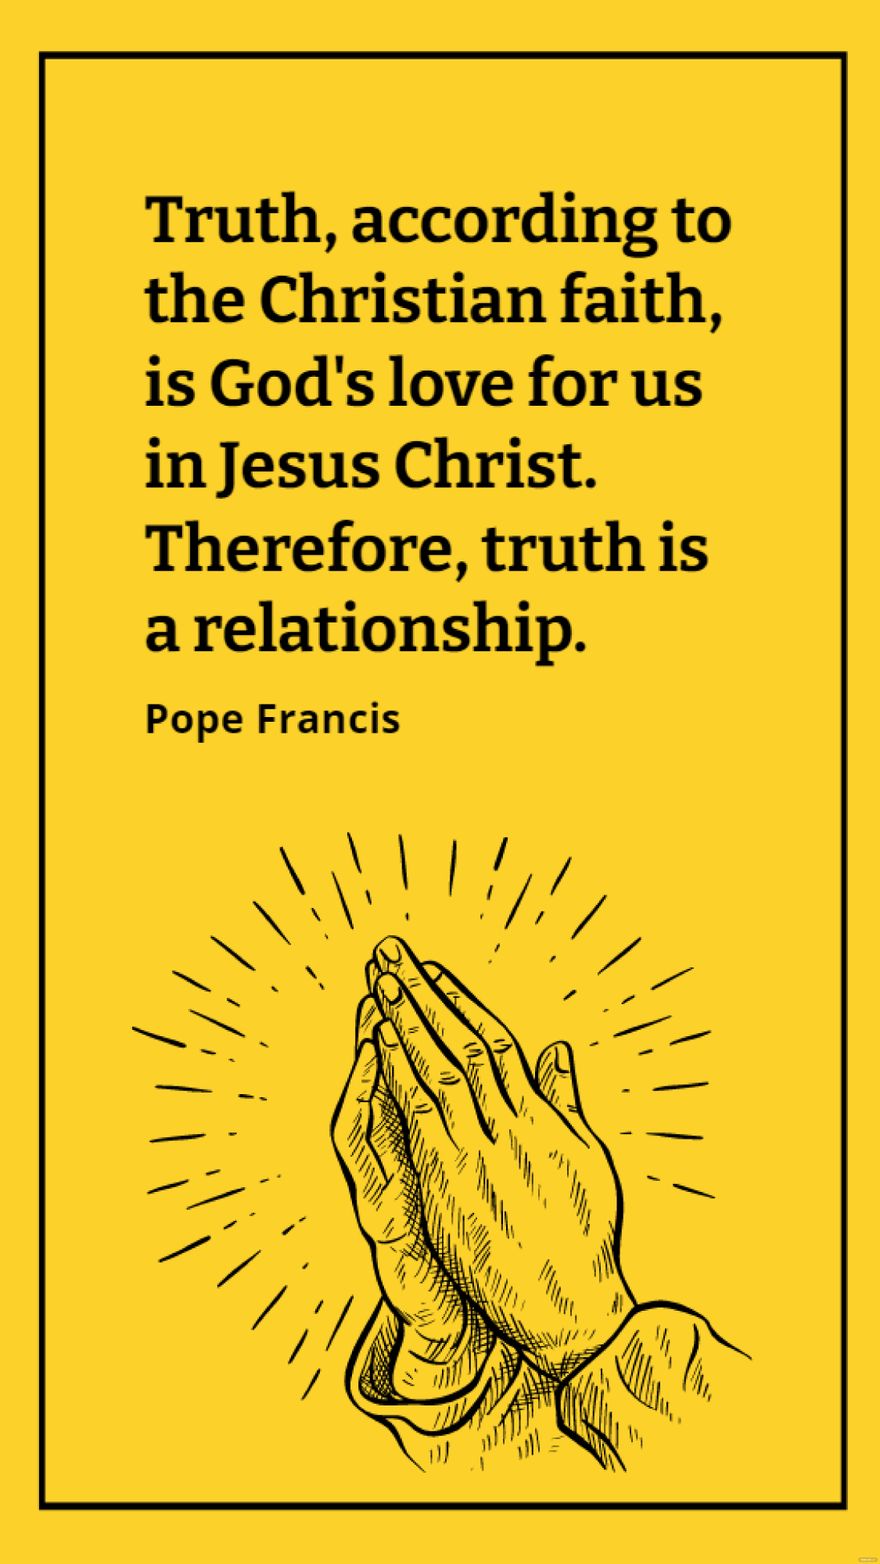 Pope Francis - Truth, according to the Christian faith, is God's love for us in Jesus Christ. Therefore, truth is a relationship.